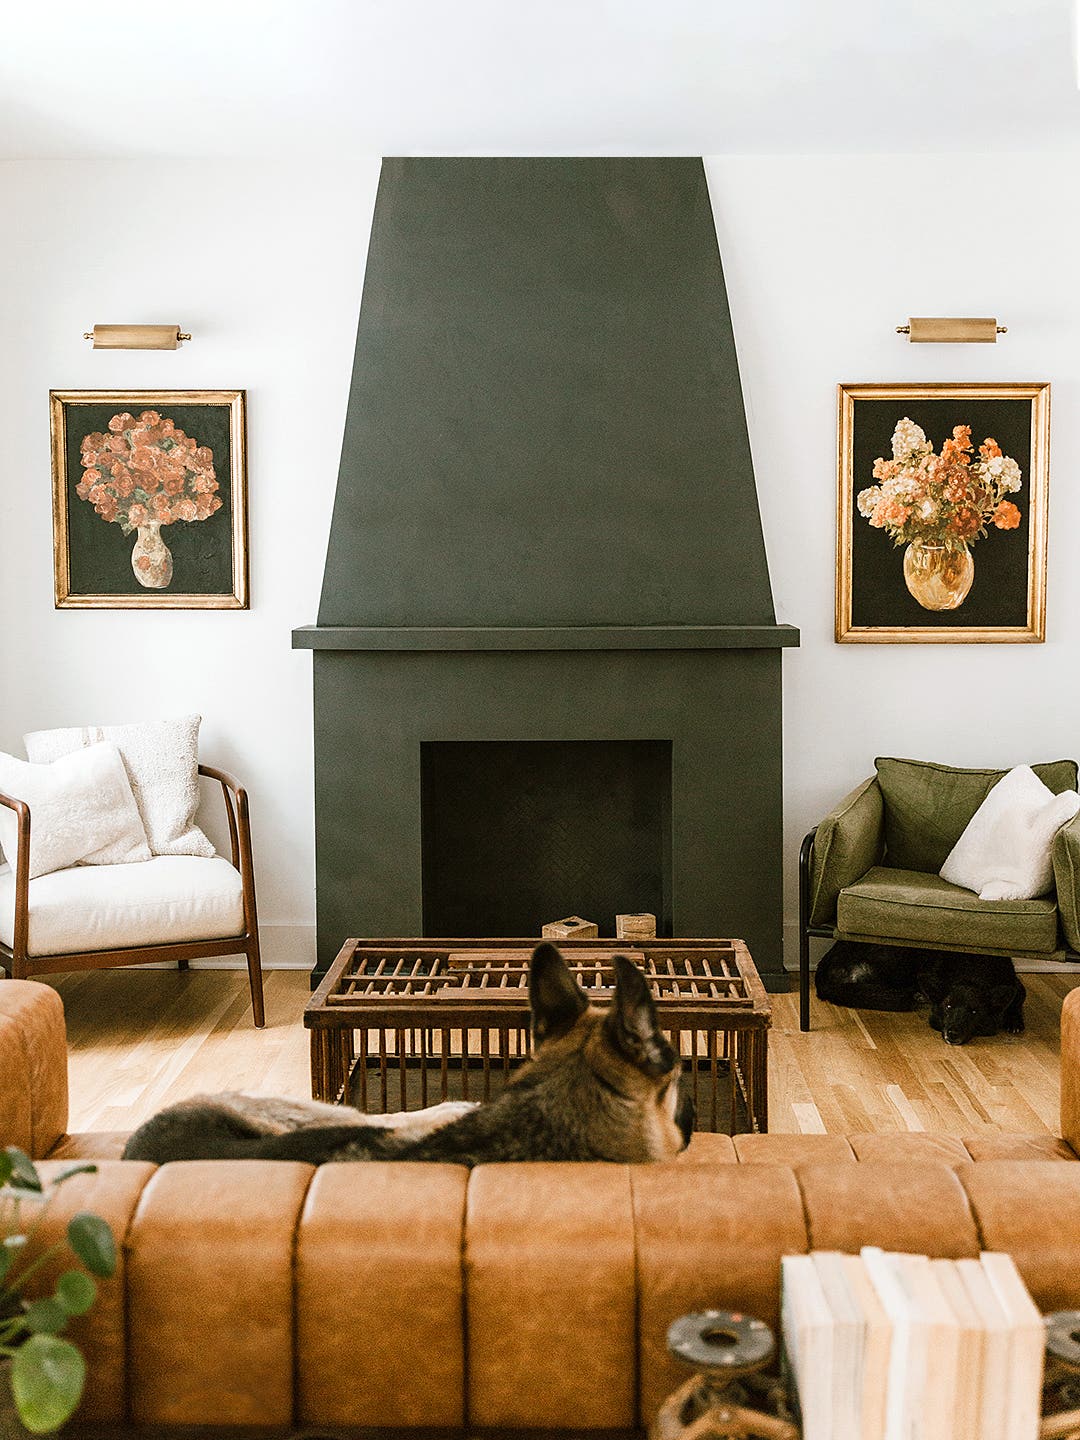 Layer These Paint Colors for the Ultimate “Concrete” Fireplace